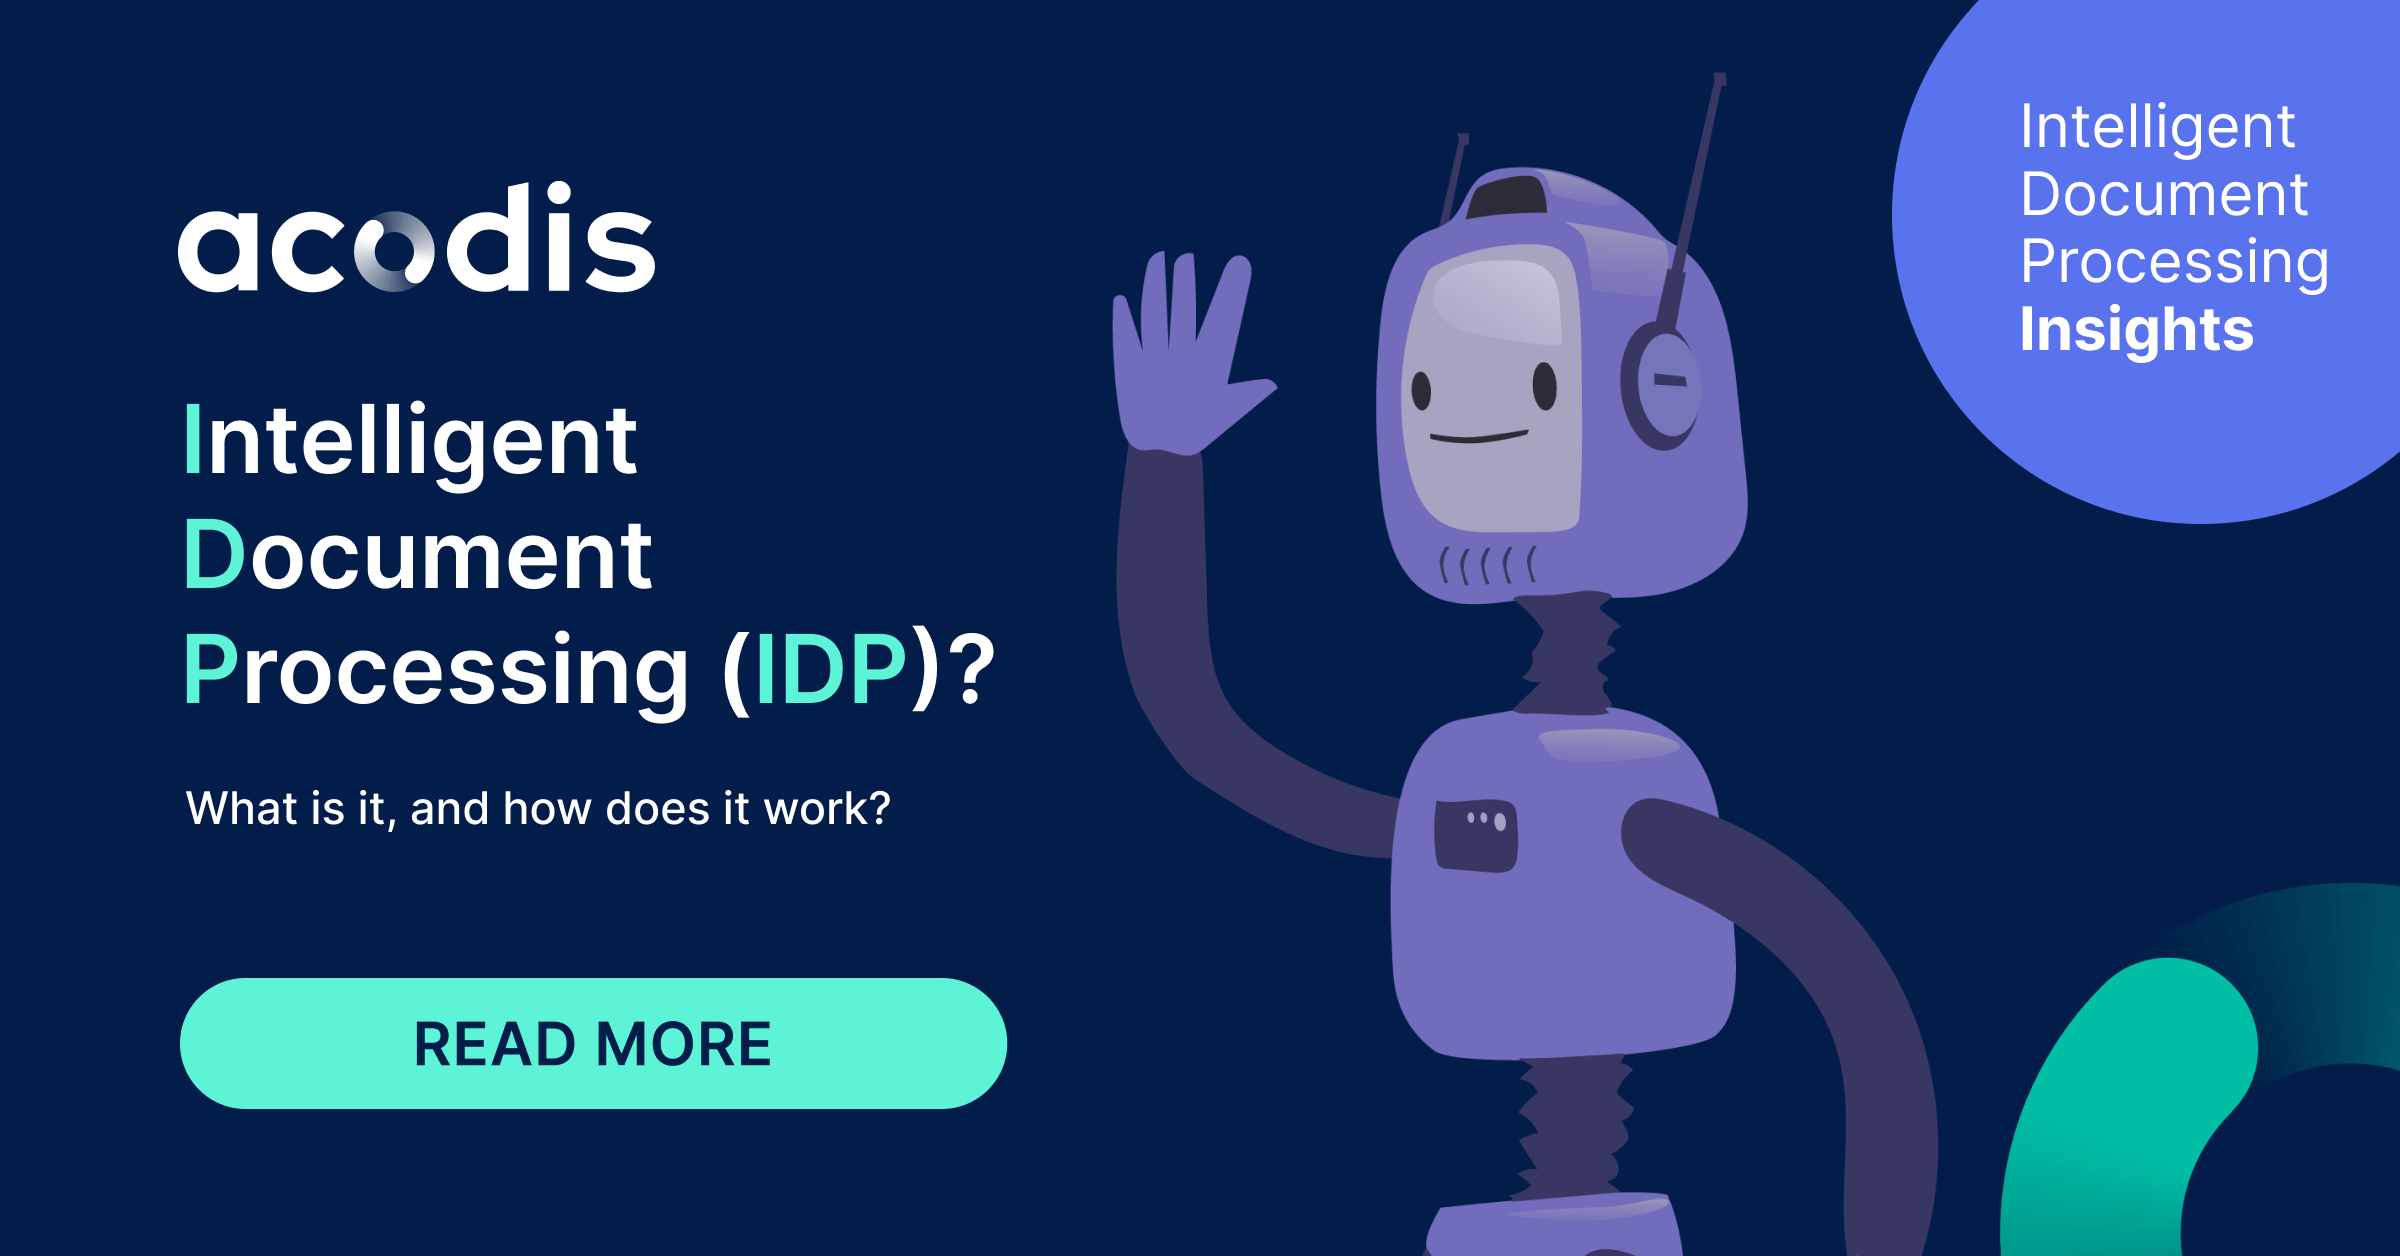 What Is Intelligent Document Processing (IDP) and How Does It Work?